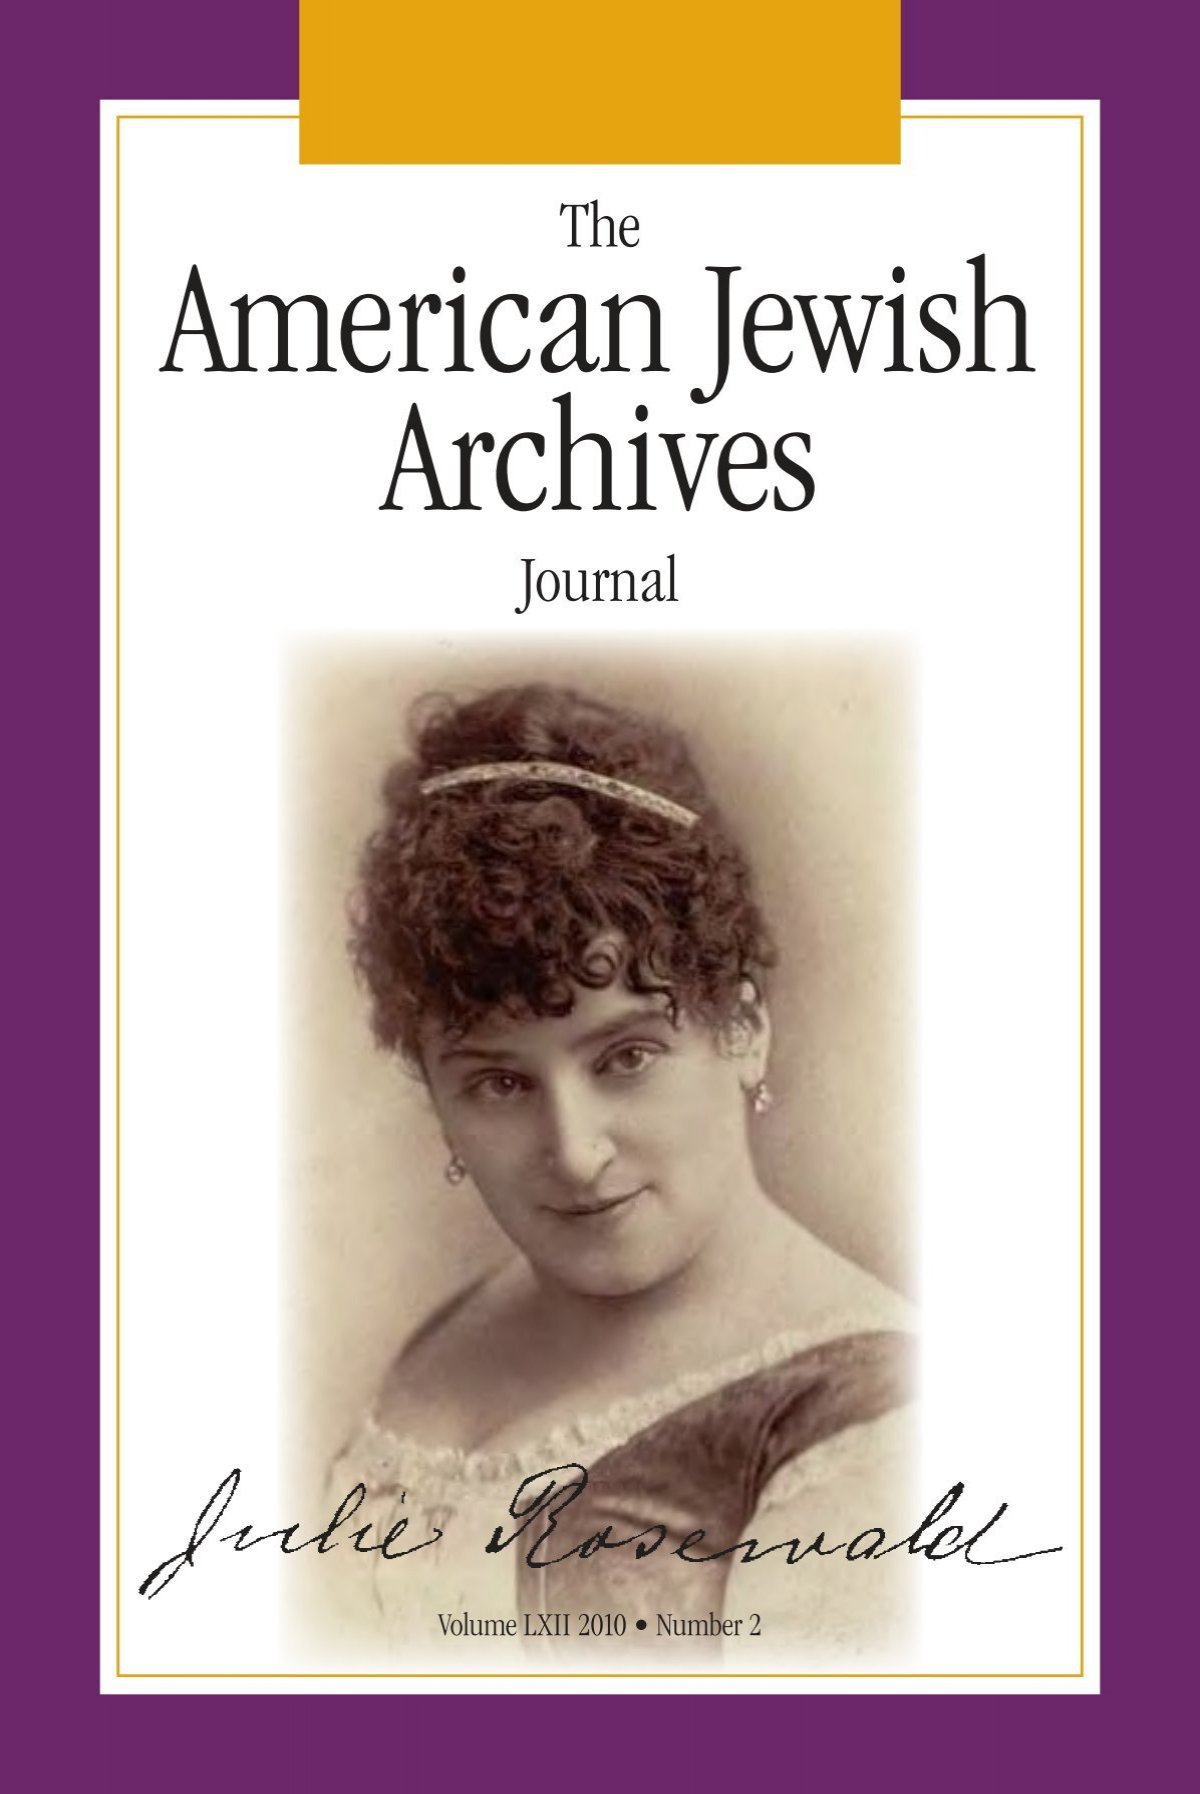 American Jewish Archives Journal